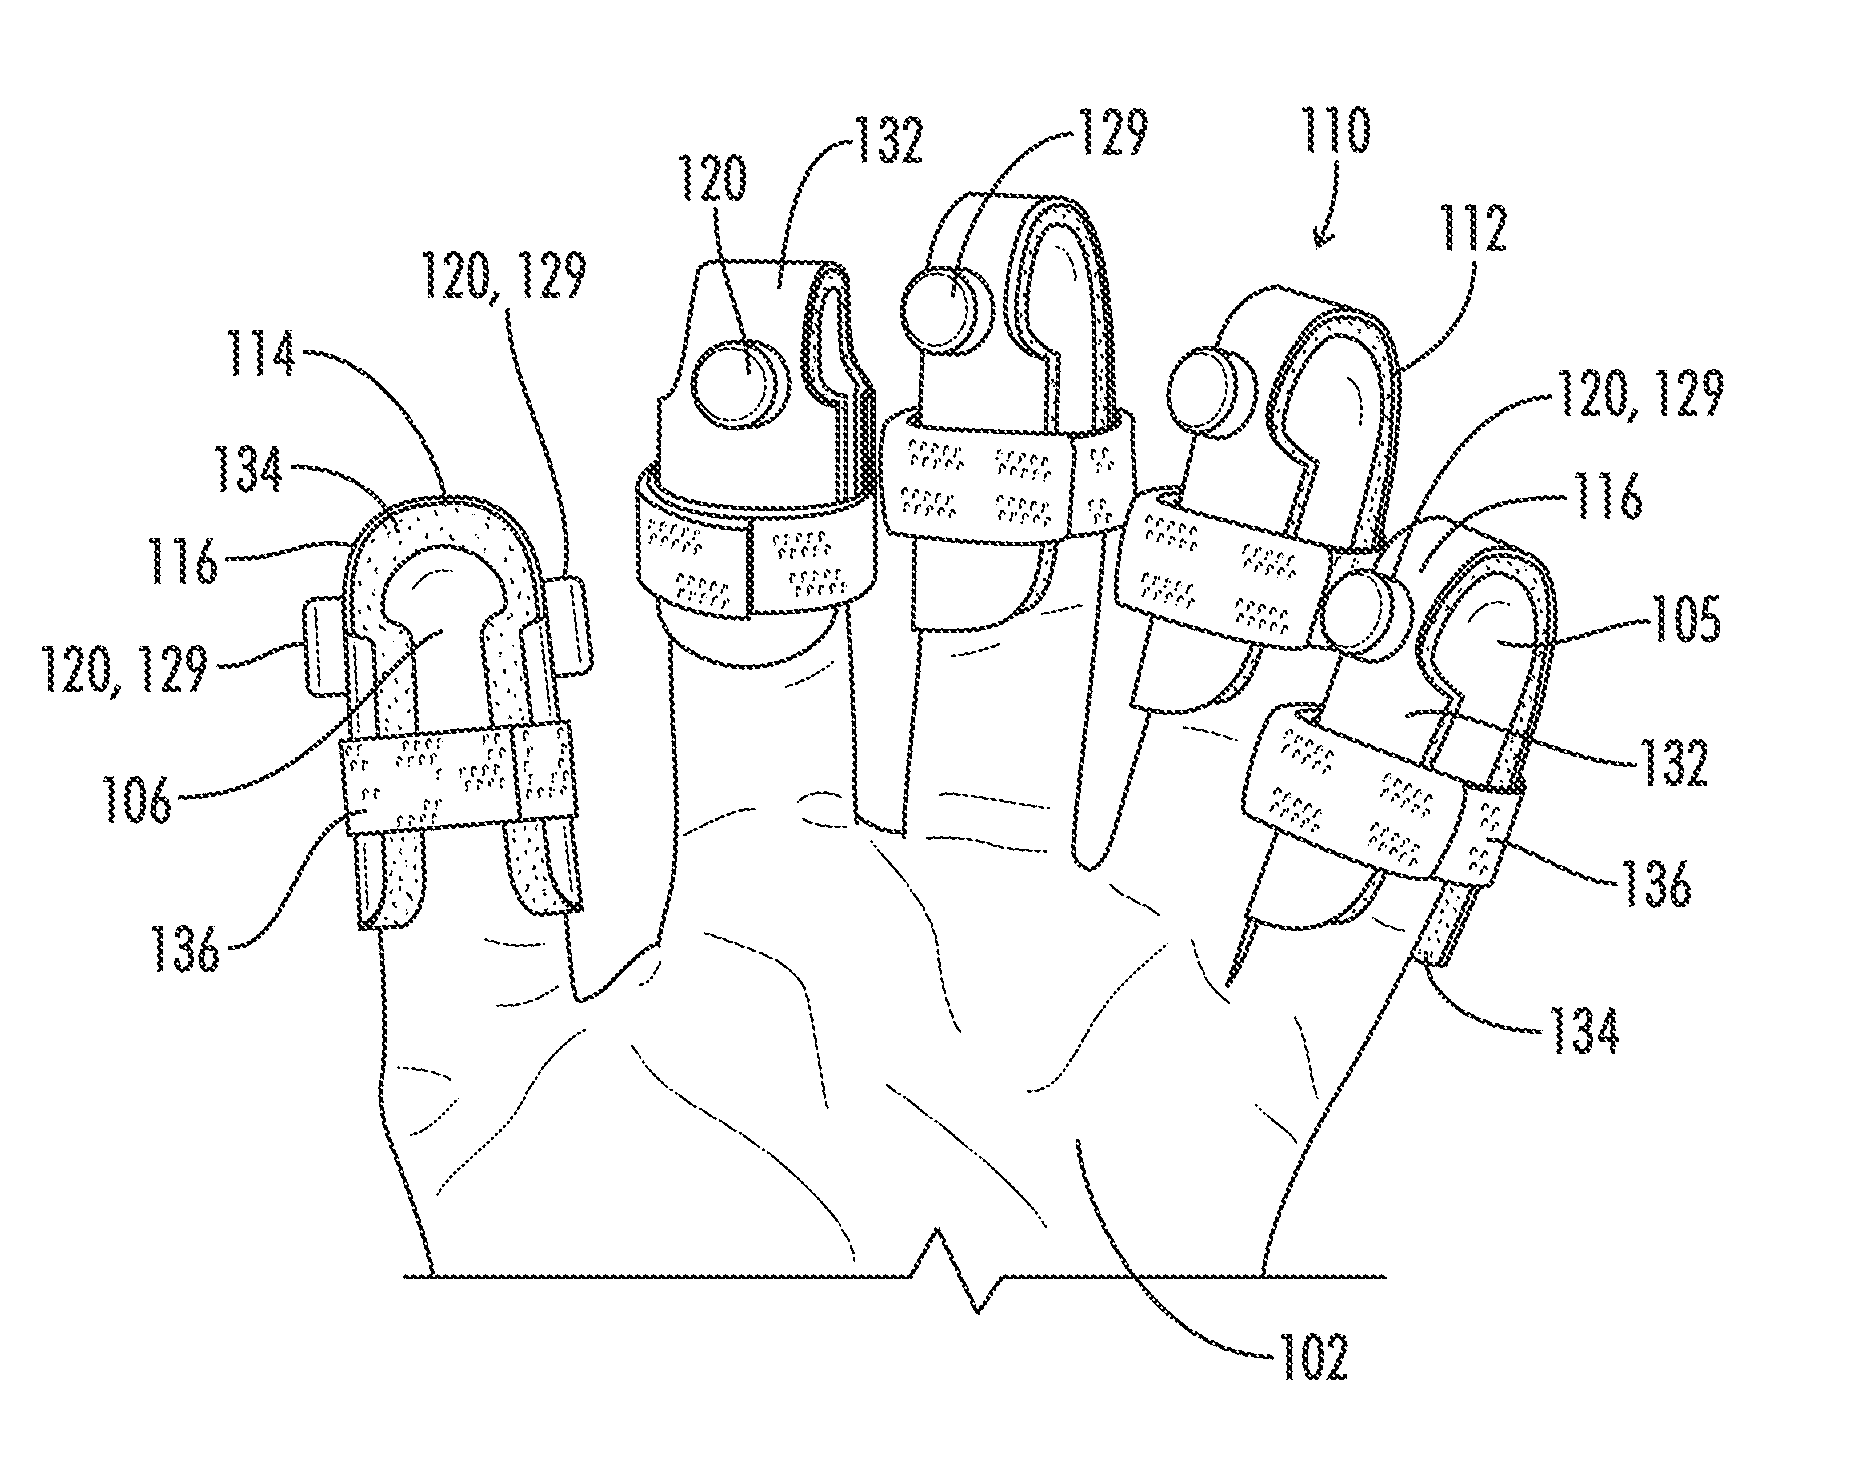 Hand exercise device